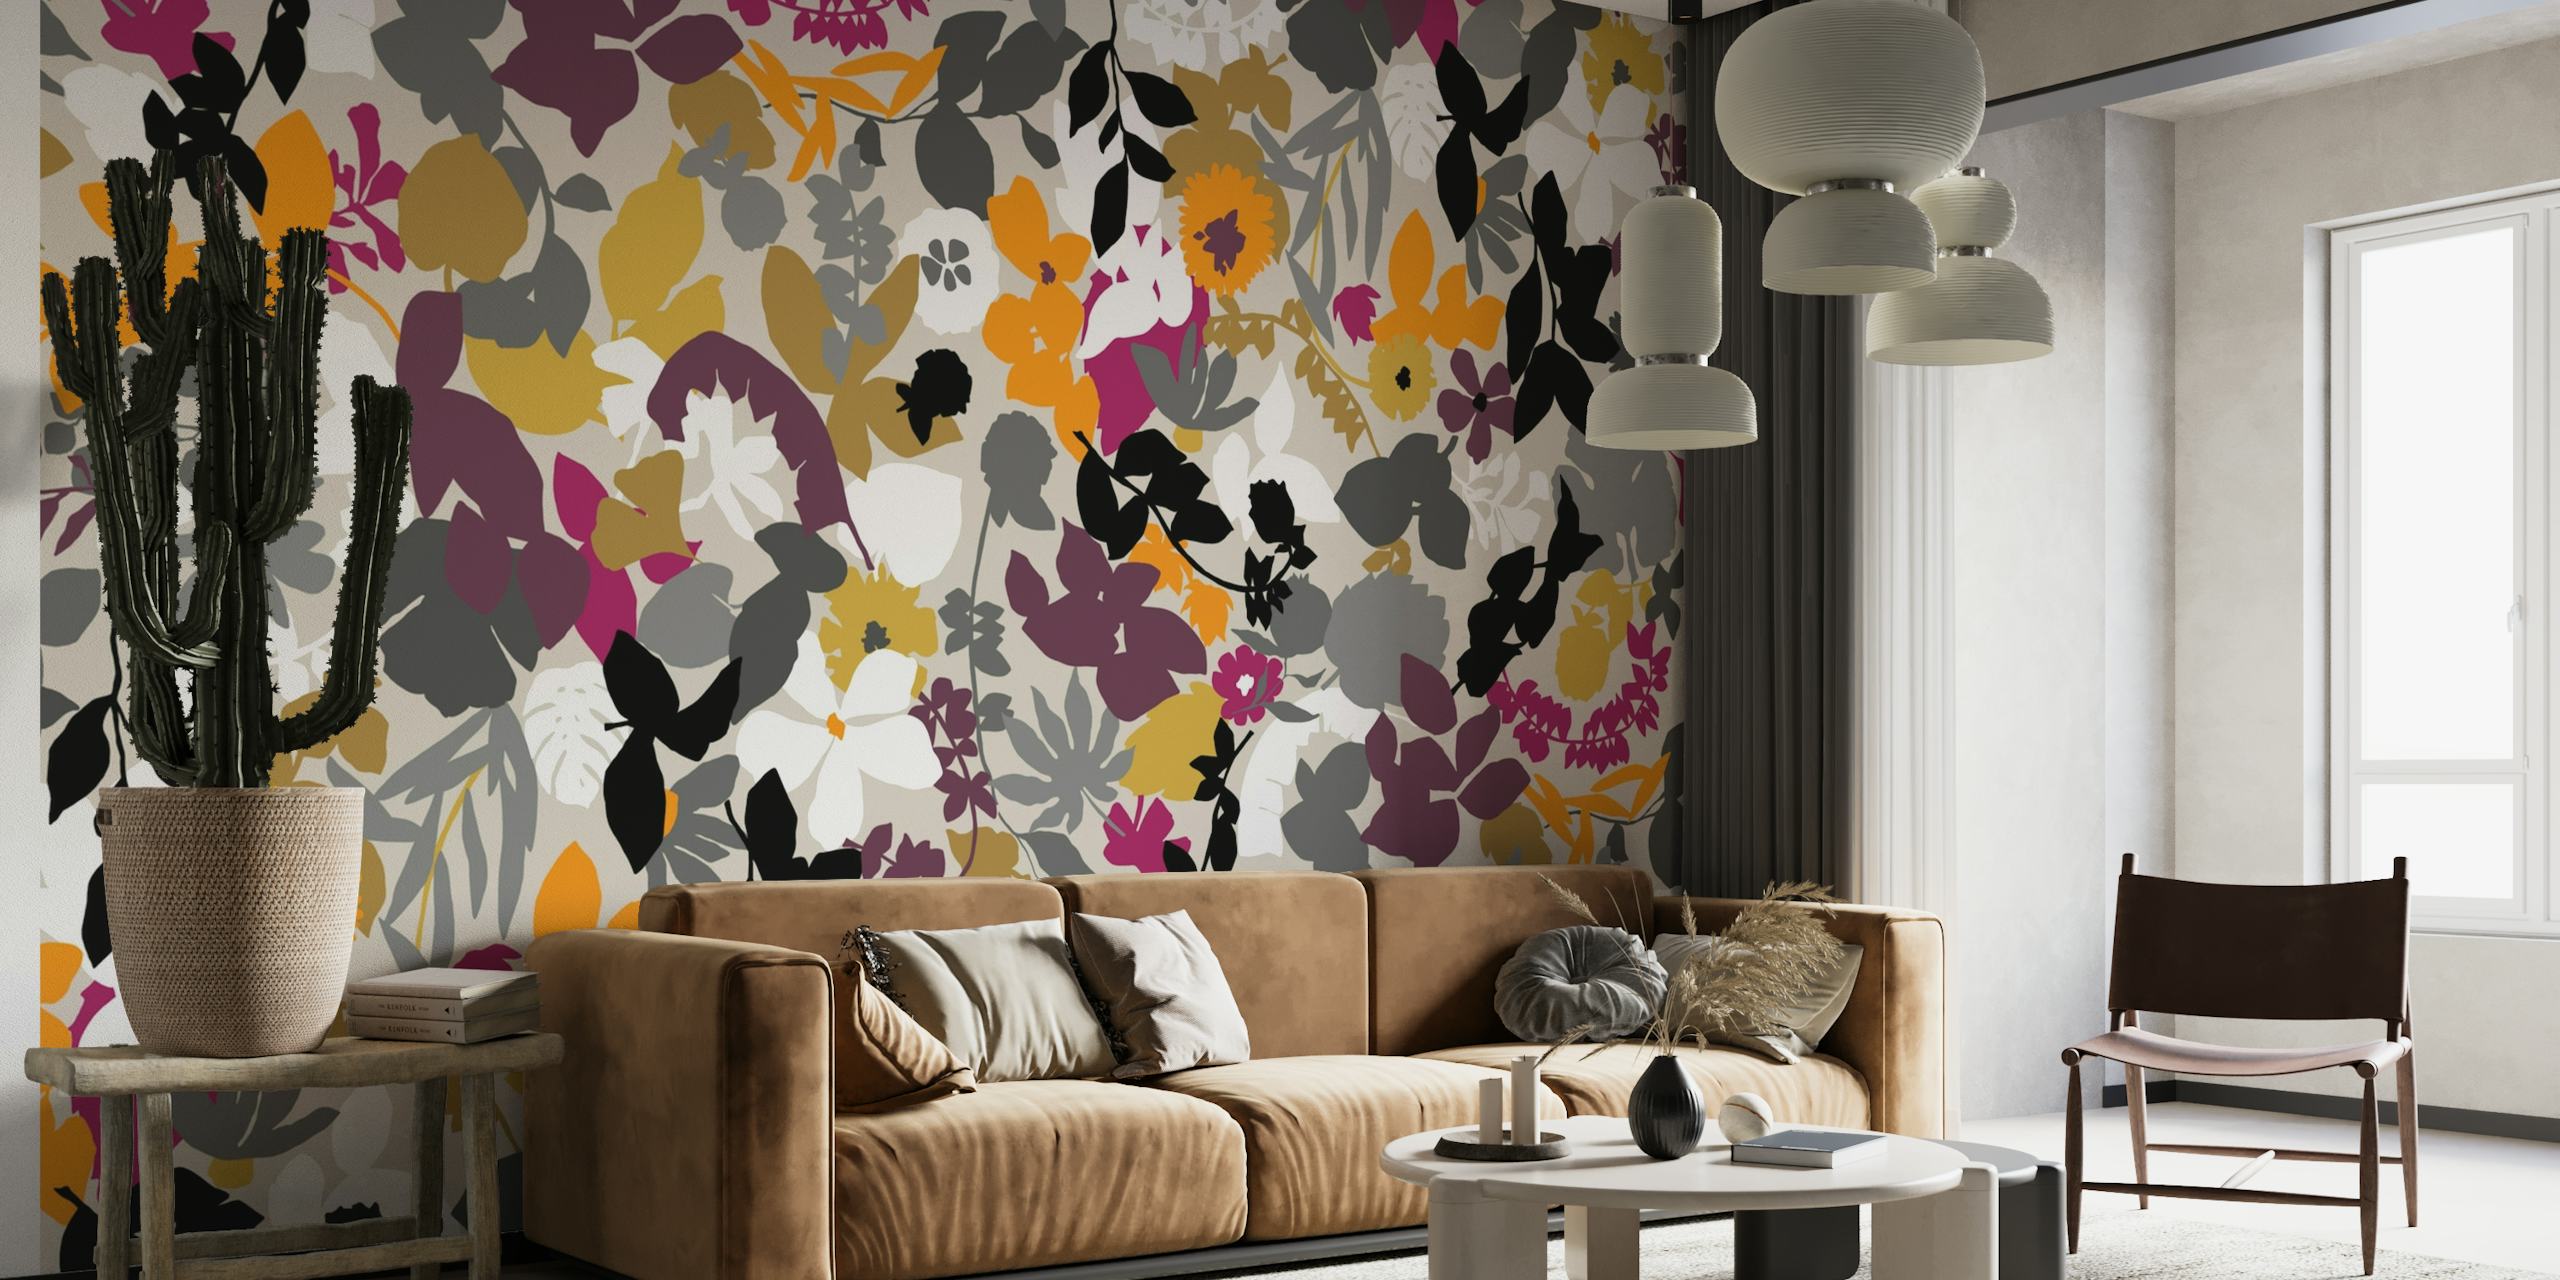 Abstract foliage wall mural in mustard, grey, and purple colors